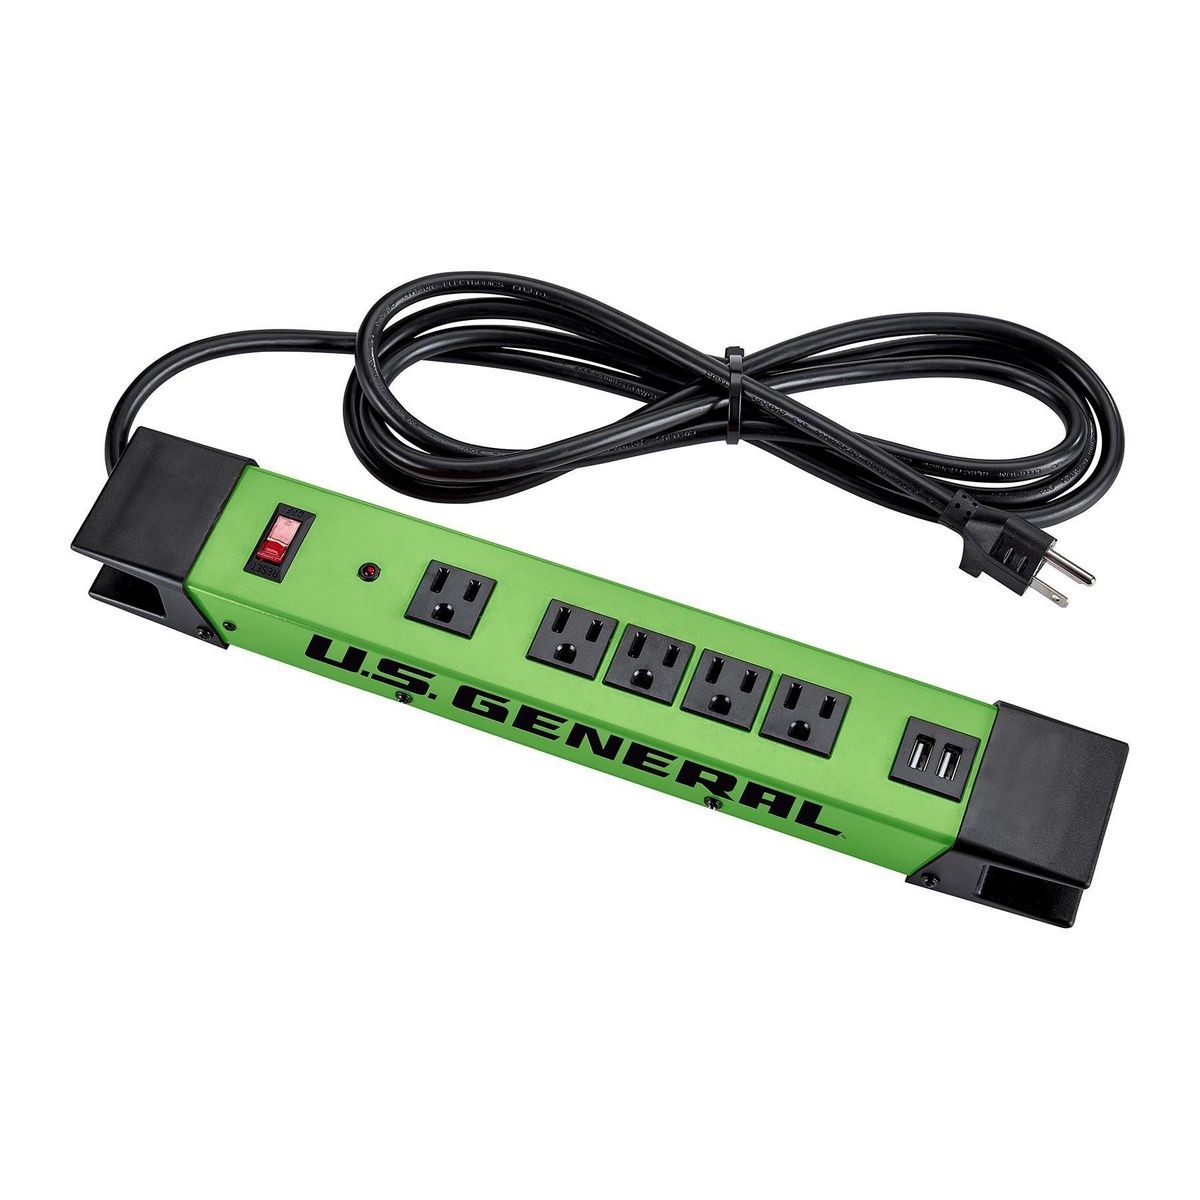 U.S. GENERAL 5 Outlet Magnetic Power Strip With Metal Housing And 2 USB Ports – Green – Item 57252